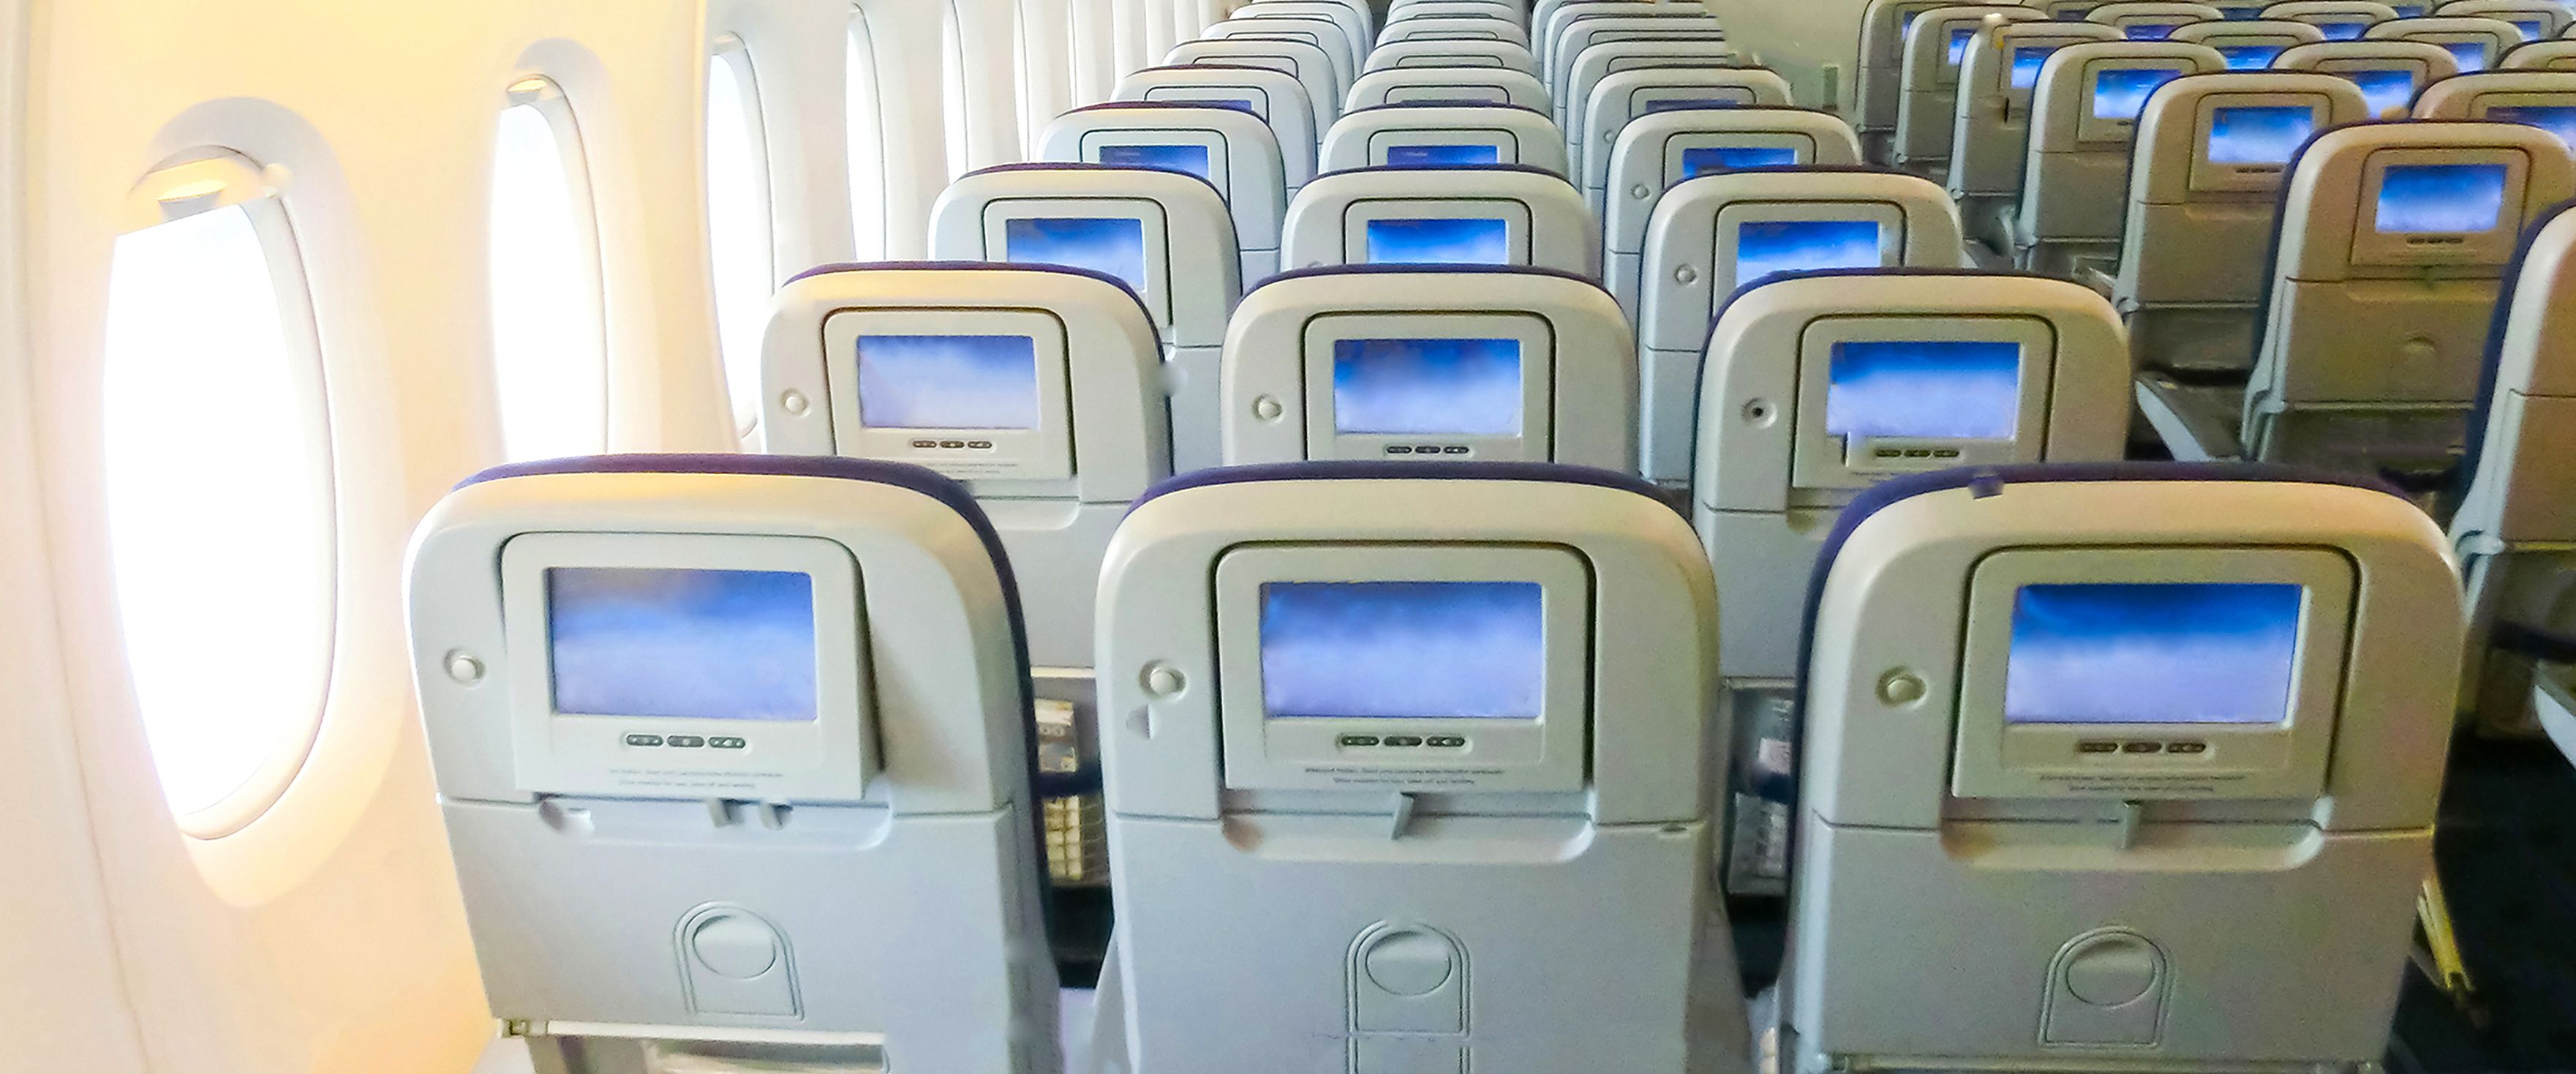 Airline Seating Arrangements Become Controversial